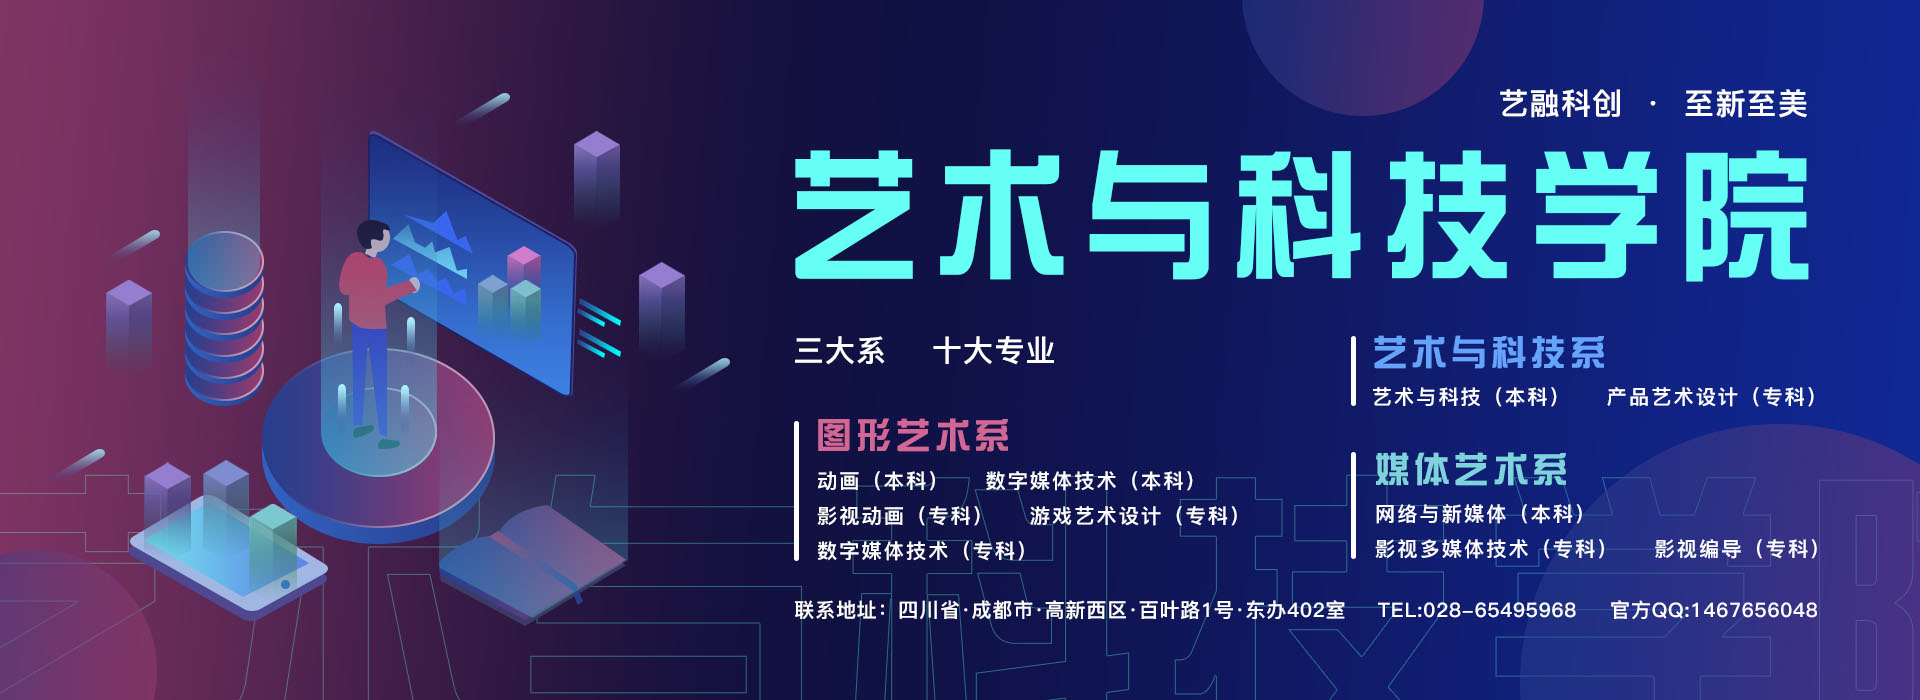 bet36体育在线banner .png